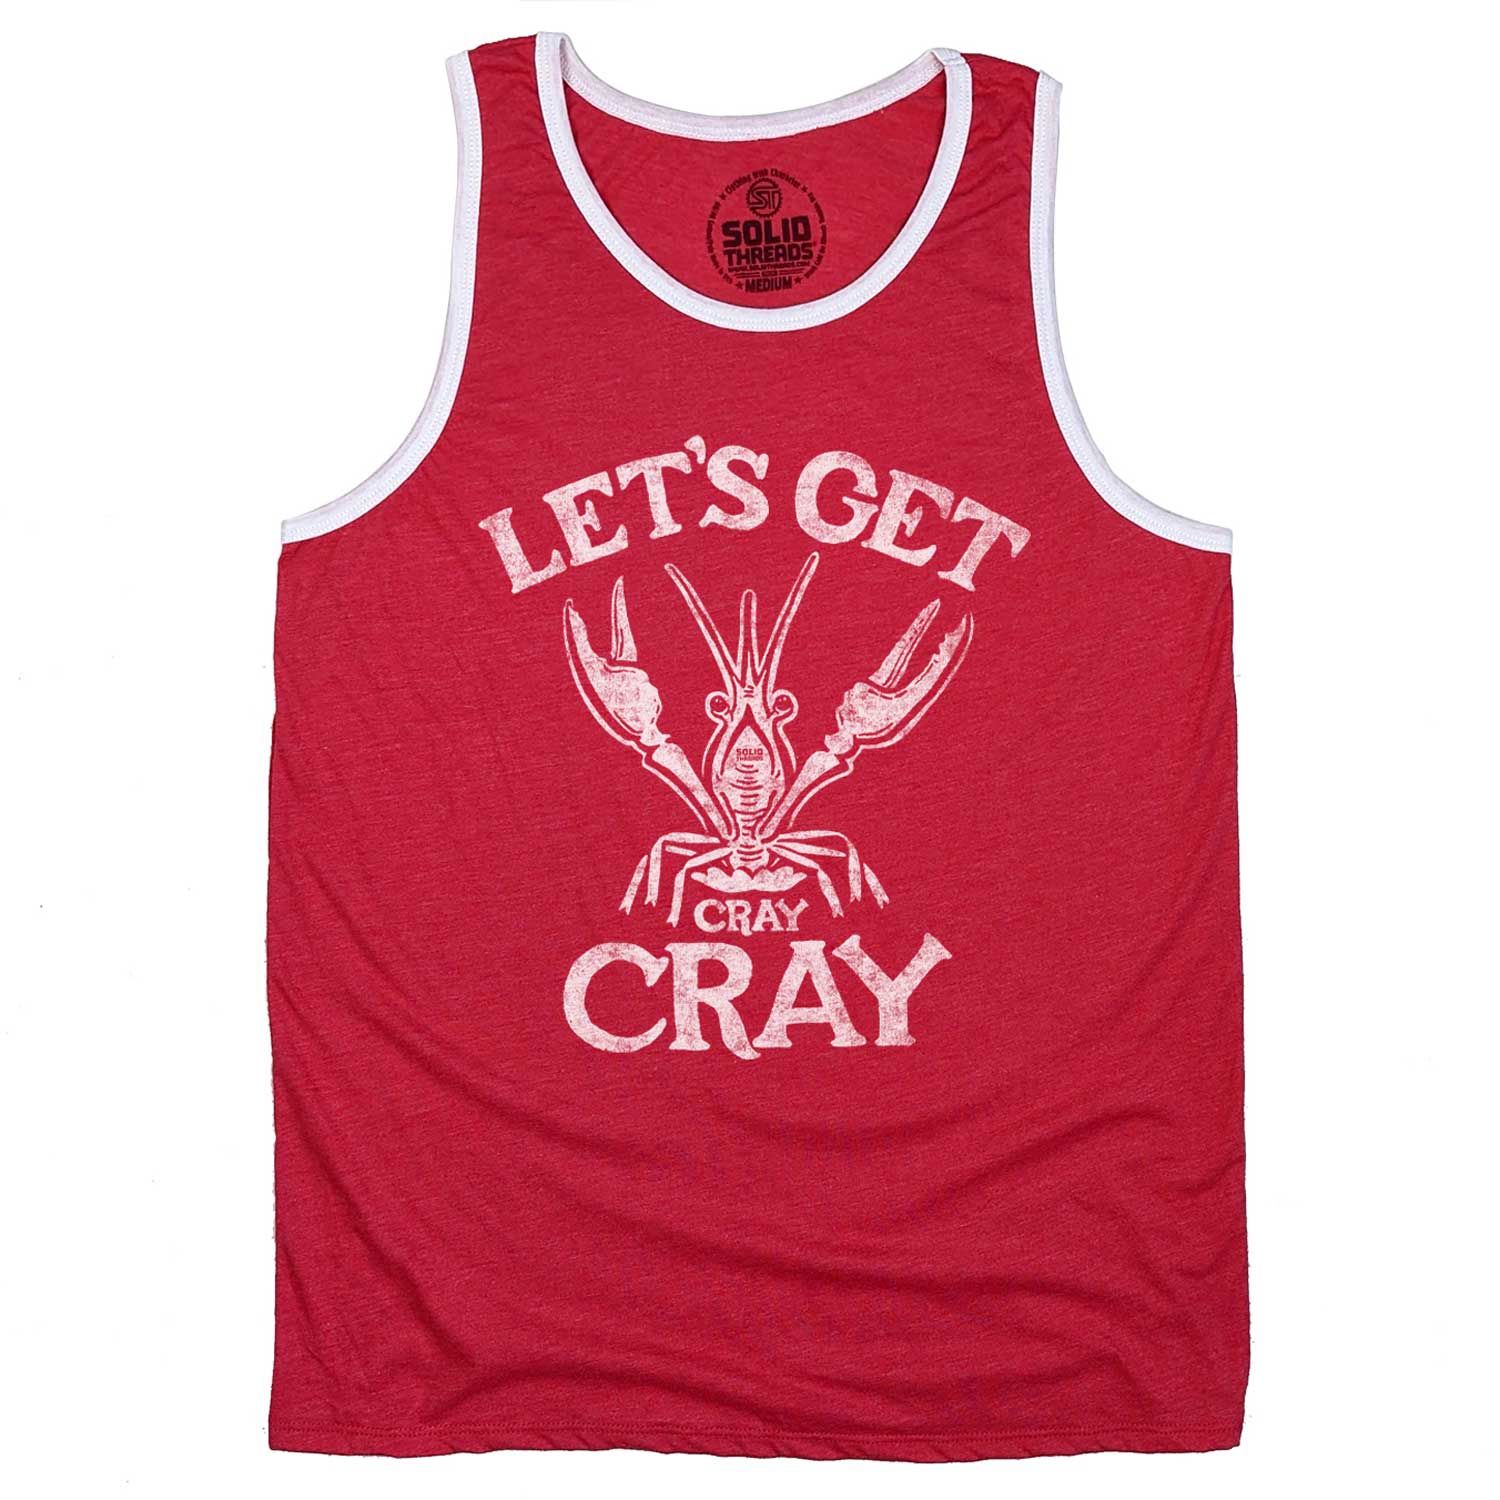 Men's Let's Get Cray Cray Vintage Graphic Tank Top | Funny Crawfish T-shirt | Solid Threads